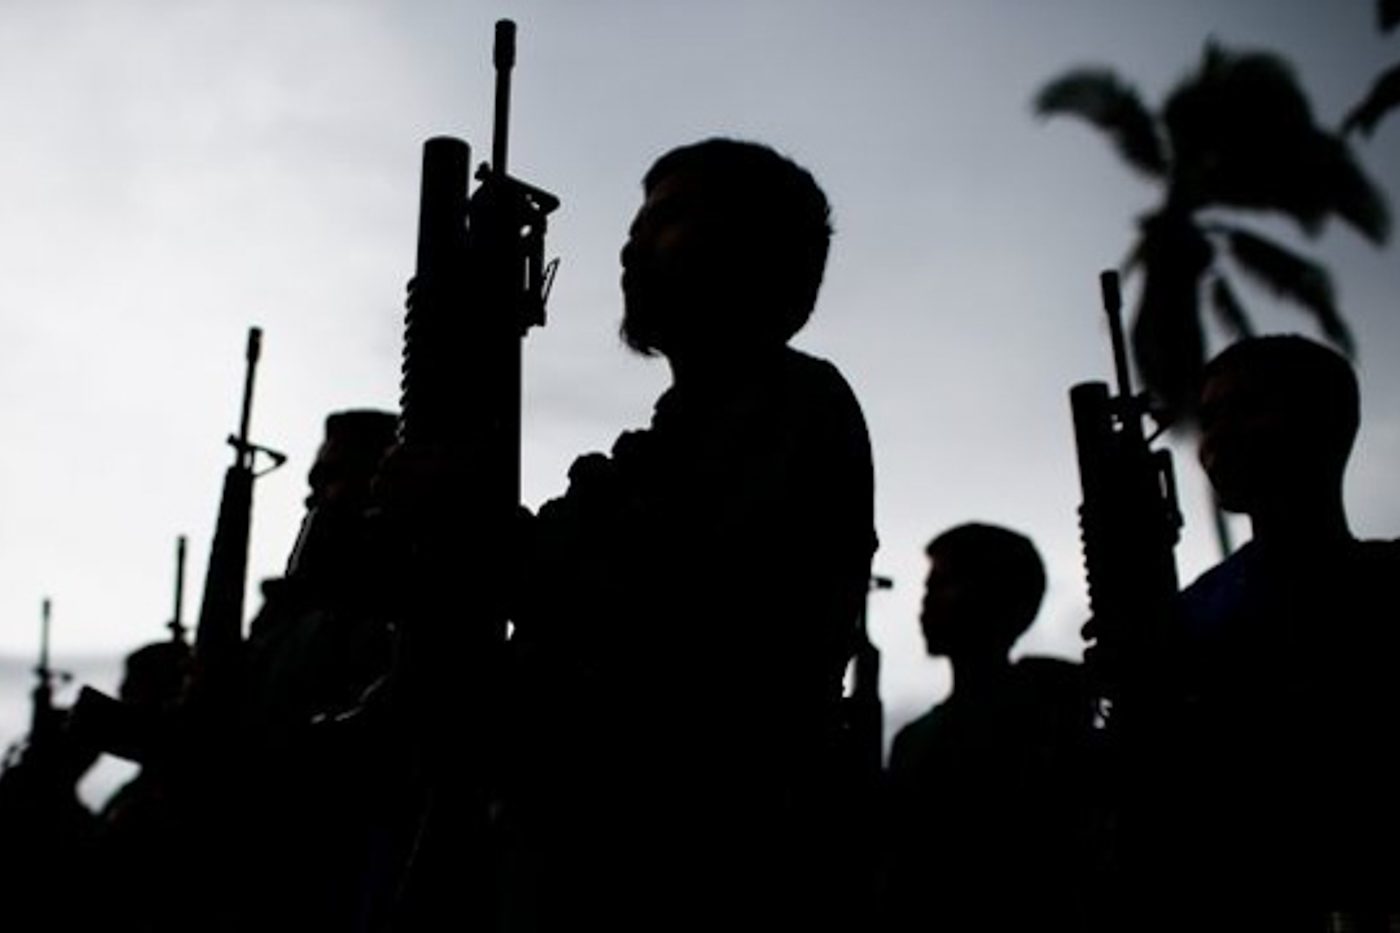 15 communist rebels killed in Batangas clashes